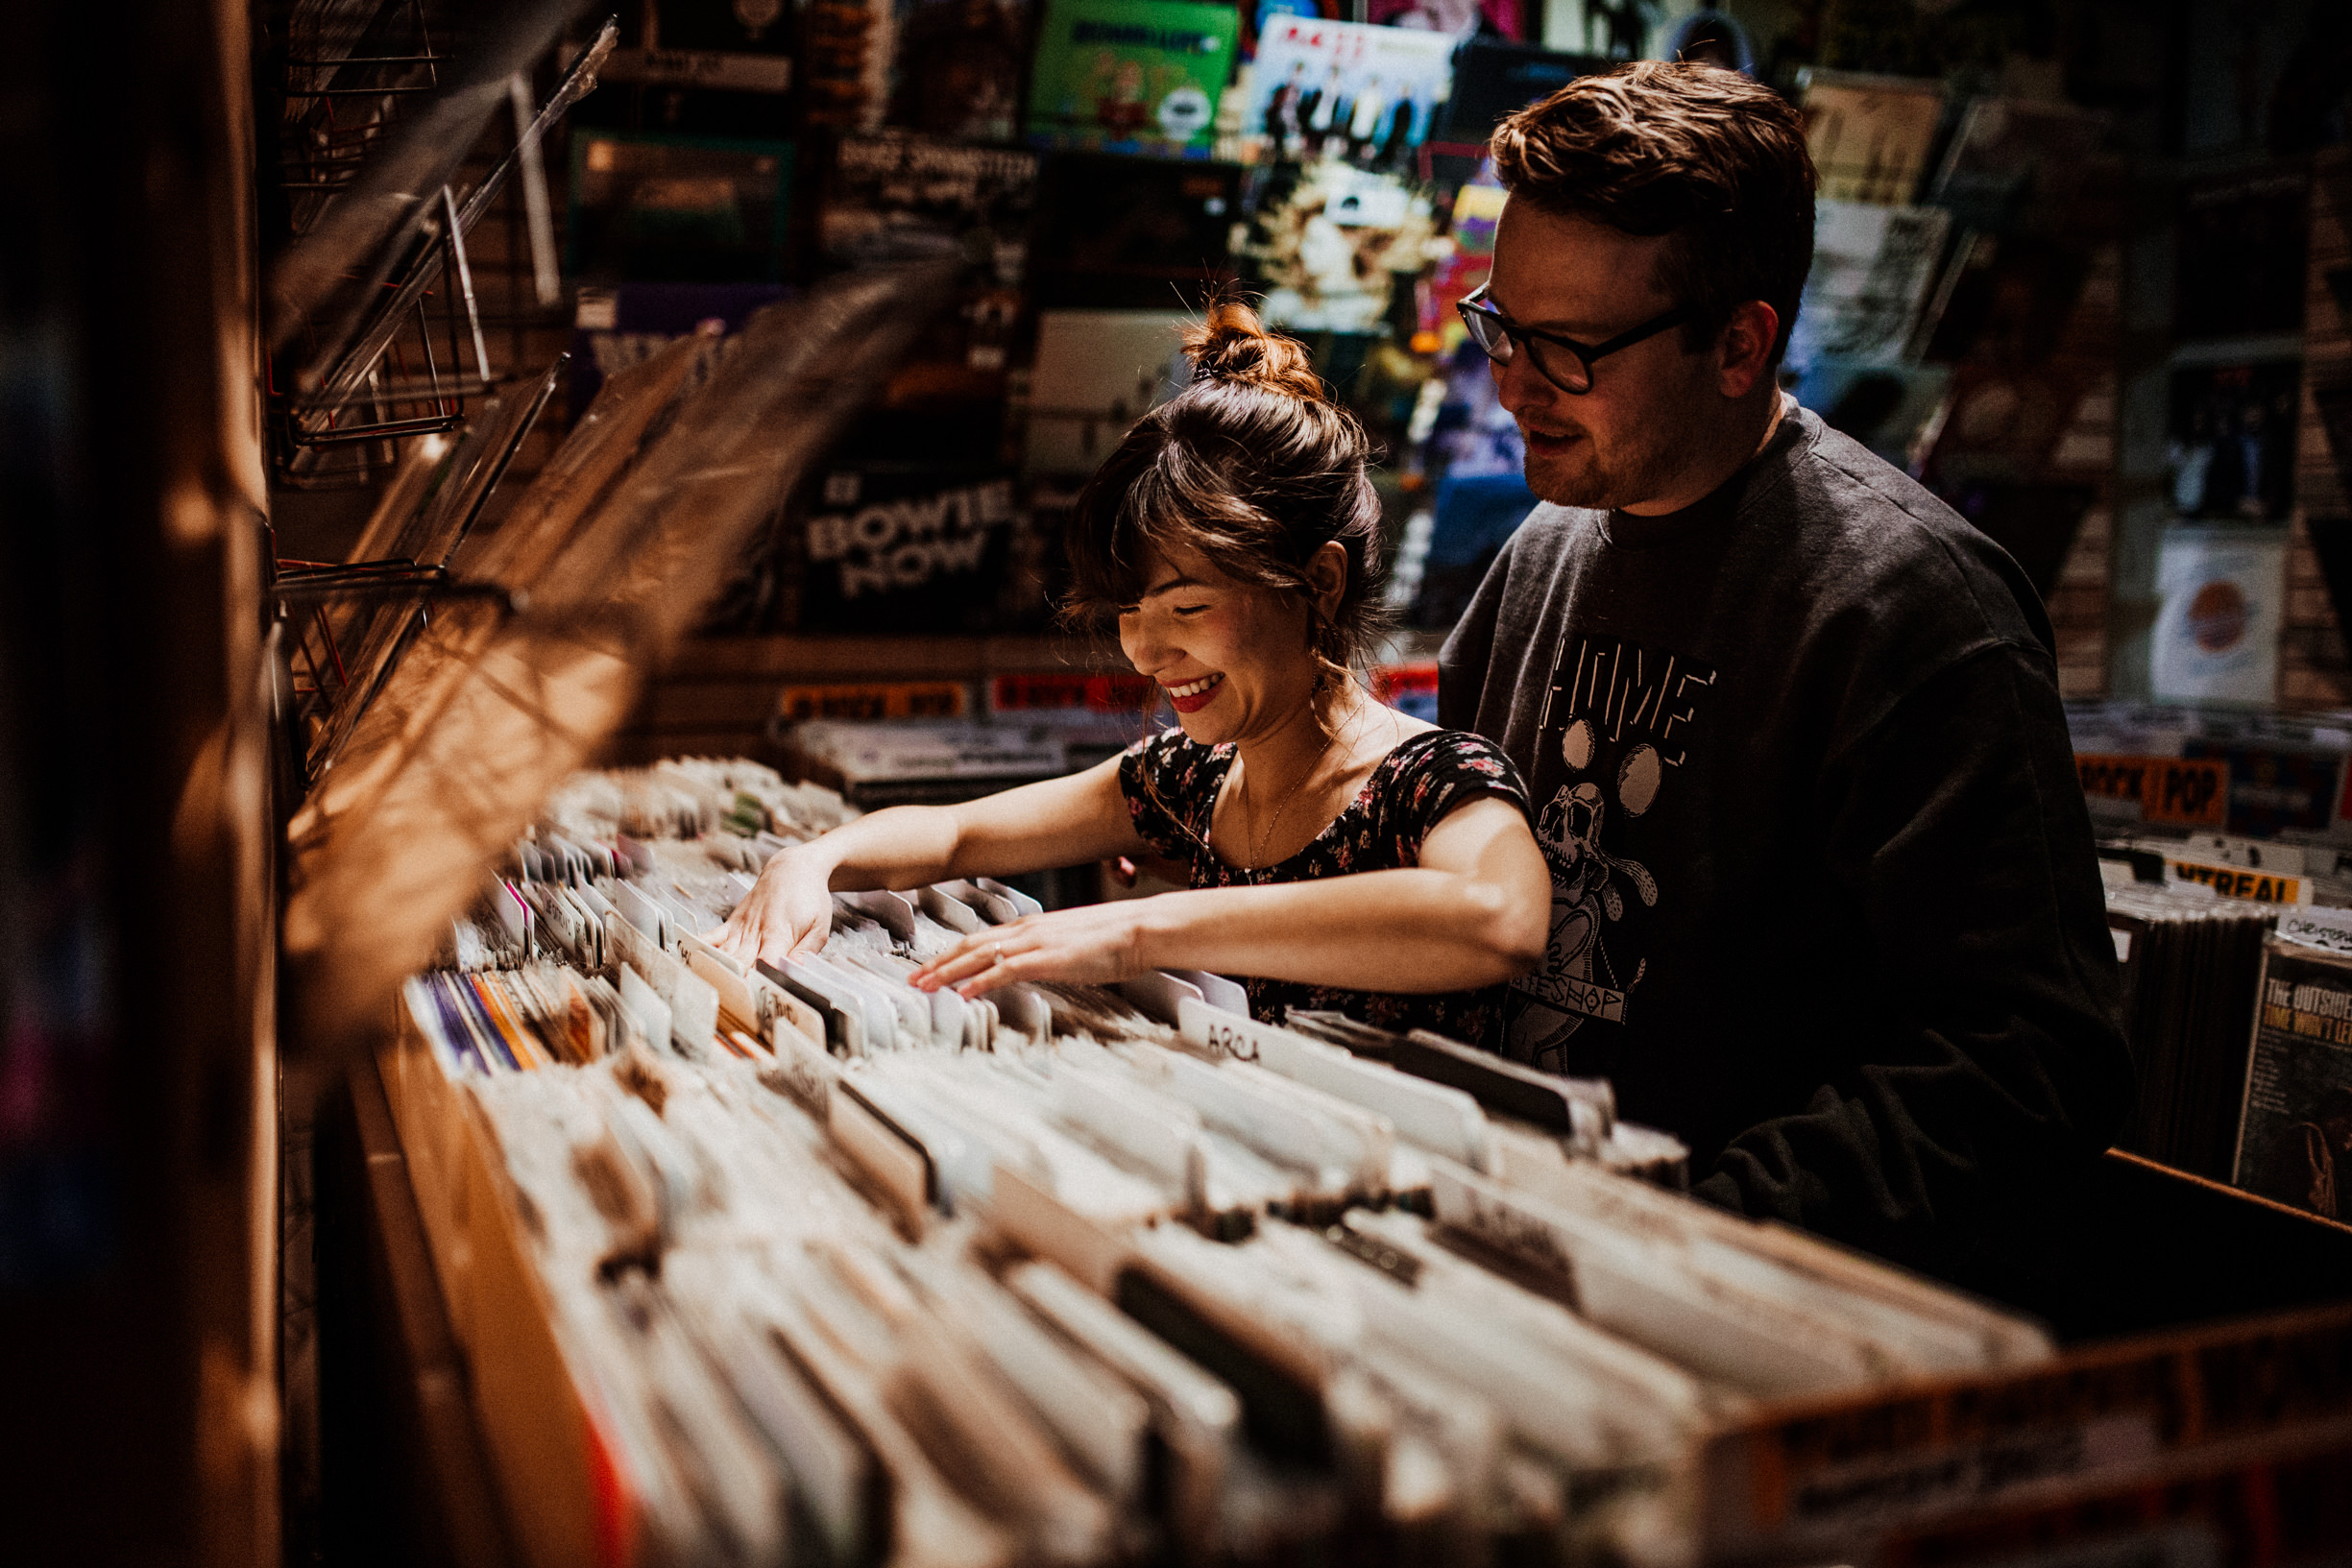 louisville-engagement-photographer-record-store-in-home-session-crystal-ludwick-photo (37 of 53).jpg